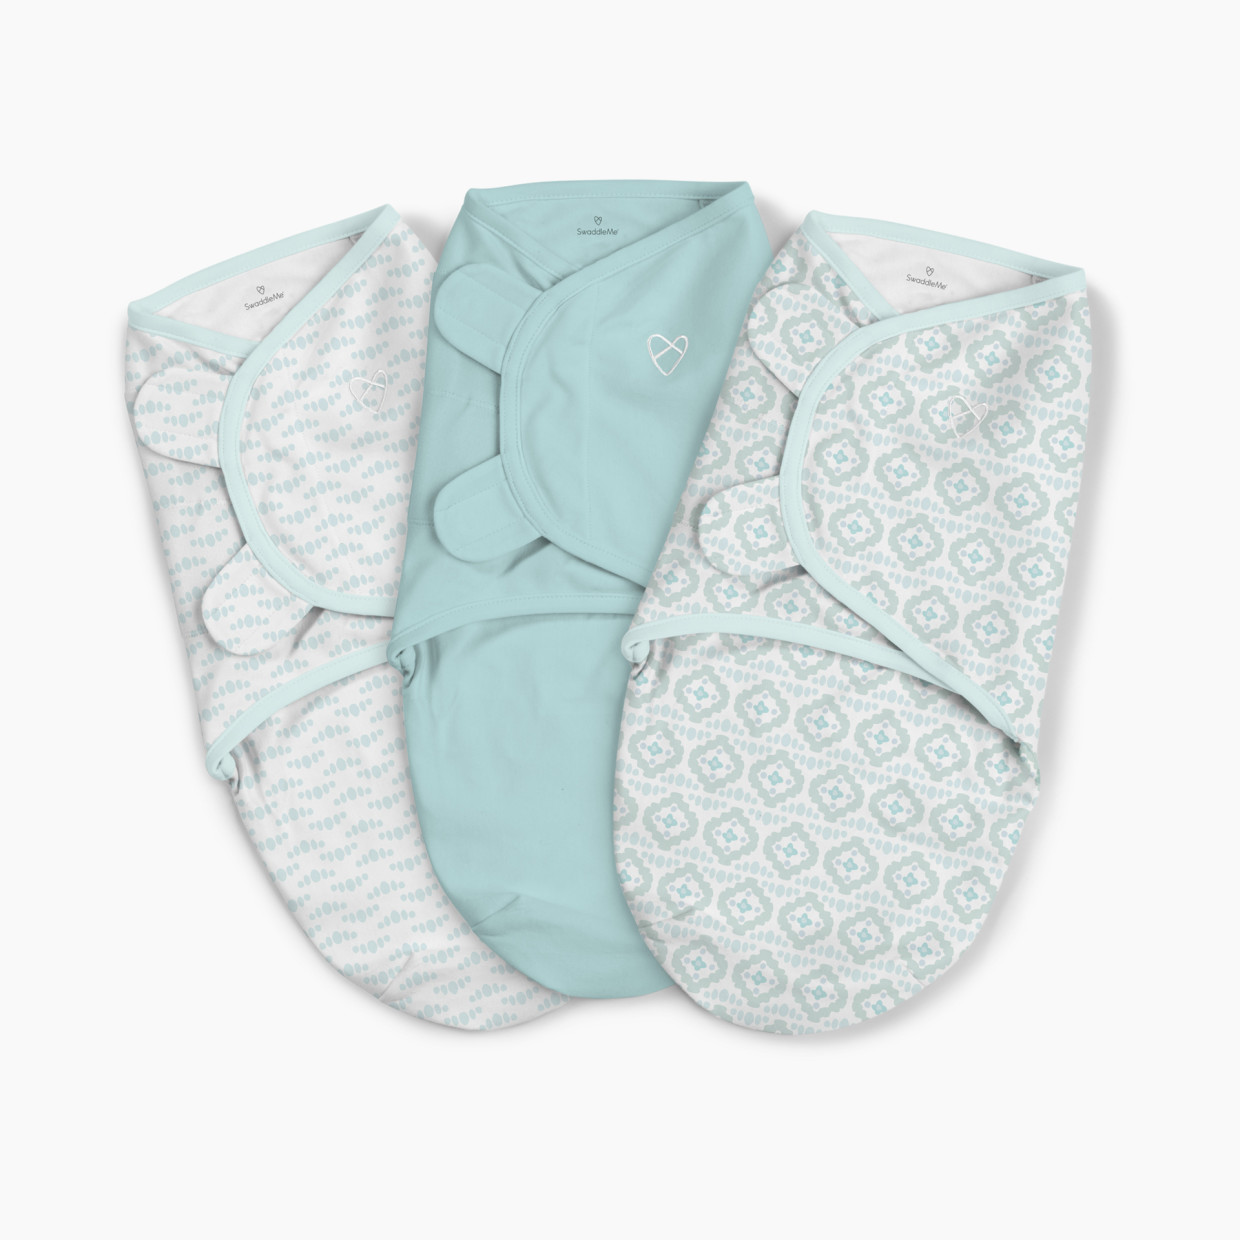 SwaddleMe Original Swaddle Multi Pack - Newport Shores, Small (0-3 Months), 3.